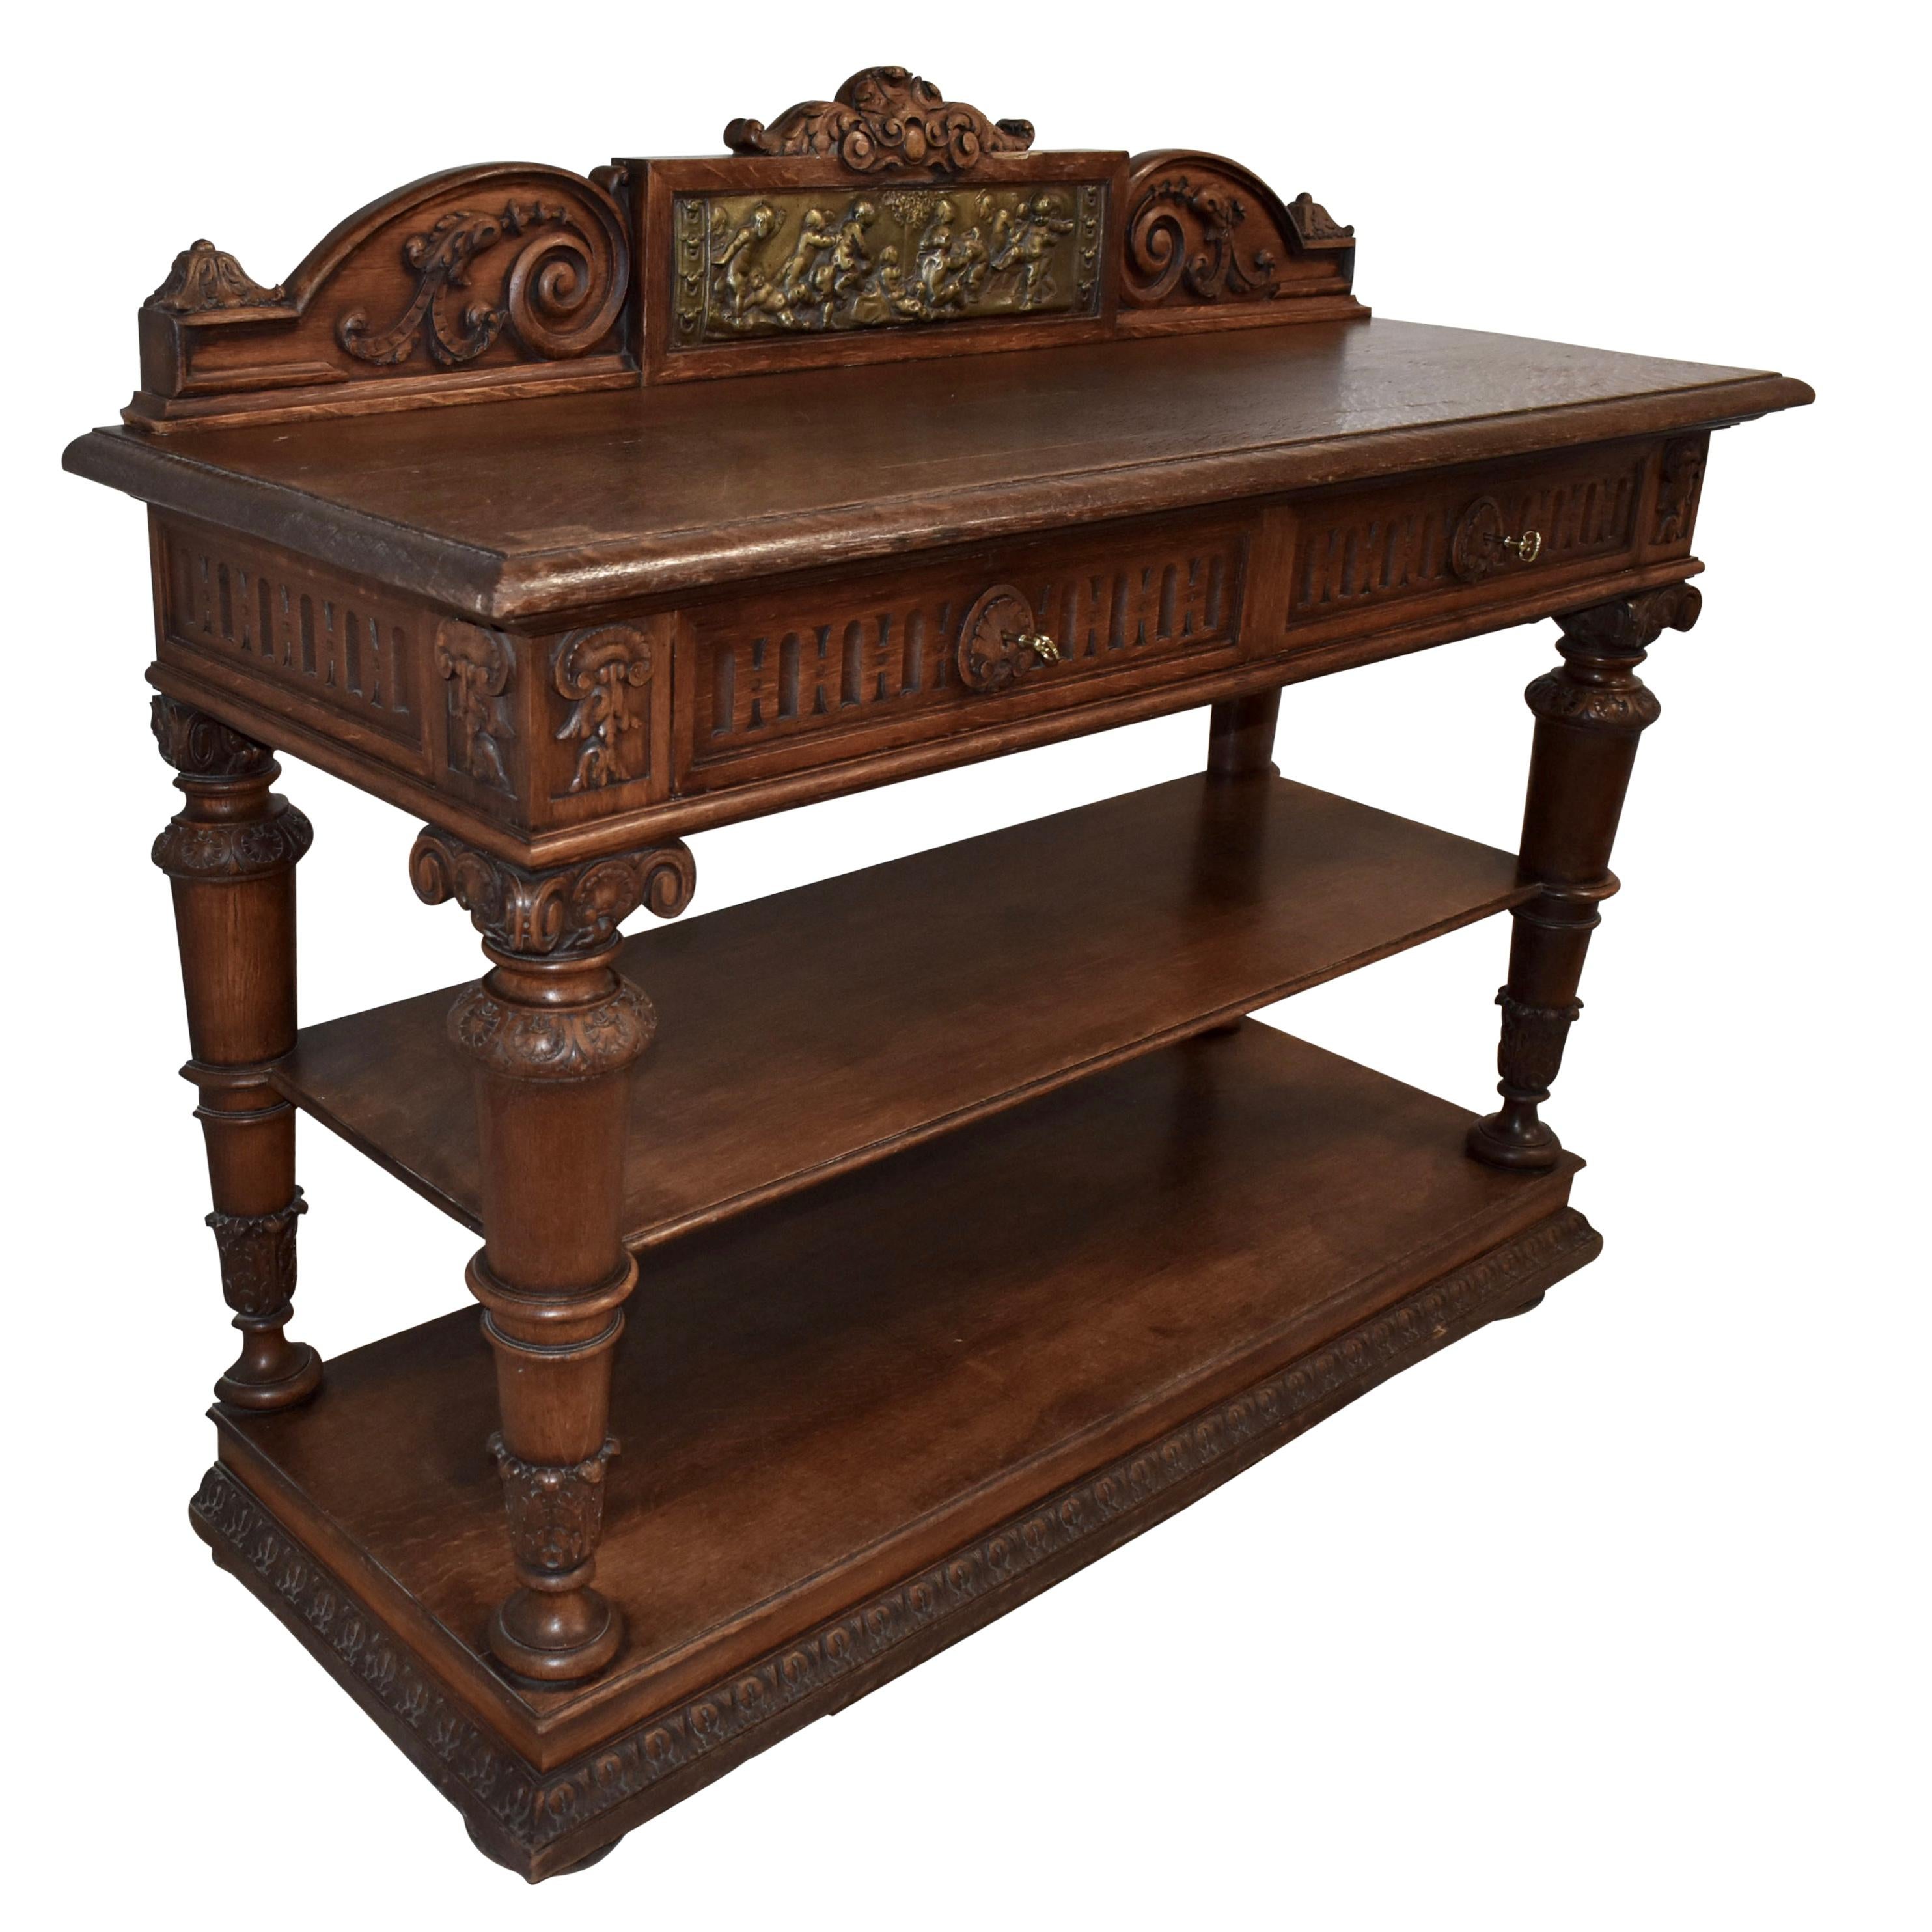 Made of oak and finished with a medium stain, this beautiful server from the beginning of the 20th-century is a feast for the eyes! From the elaborately carved crown over the backboard down to its crescent bun feet at the base, everything about the